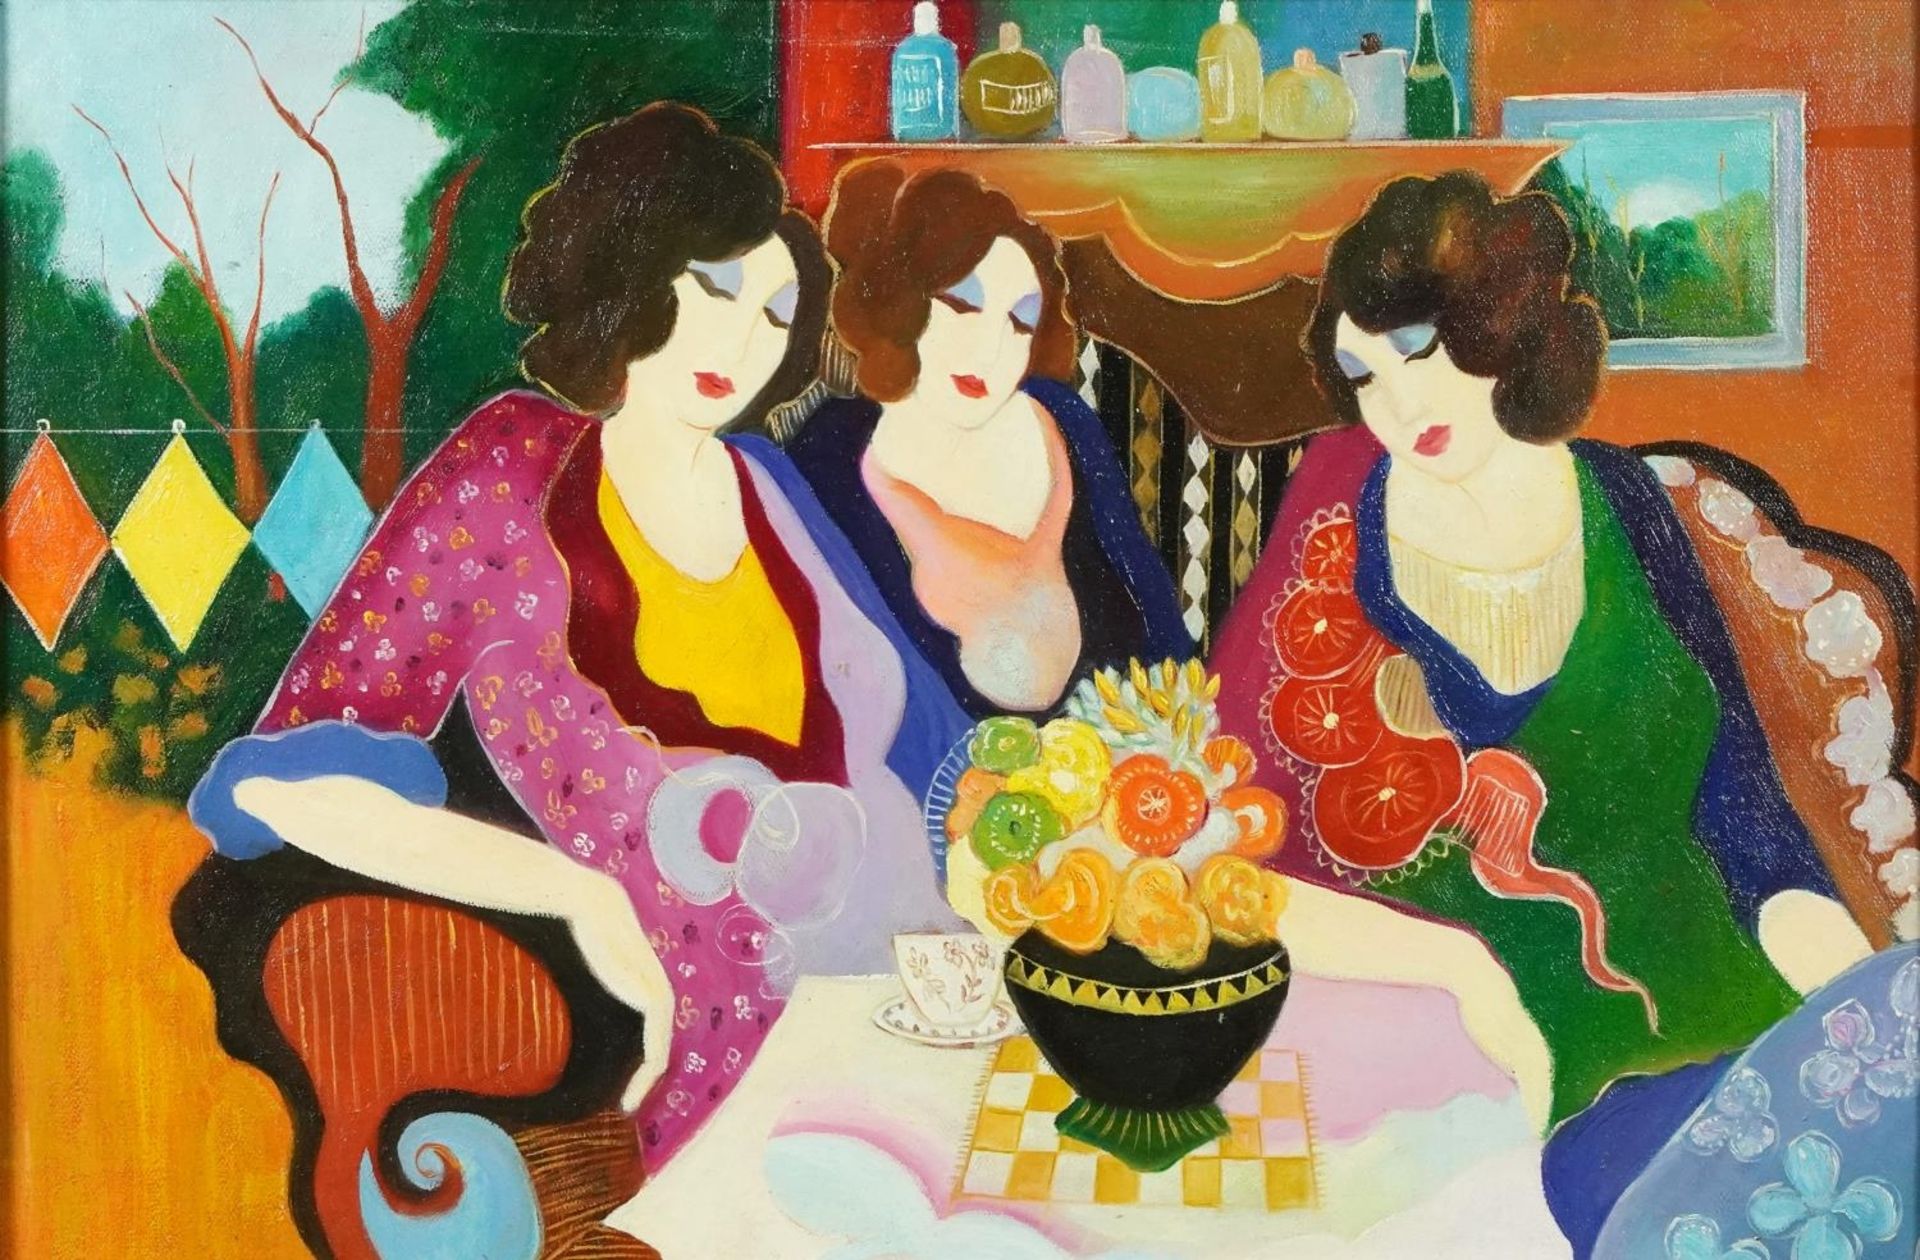 After Itzchak Tarkay - Afterparty, American school oil on board, mounted and framed, 60cm x 40cm